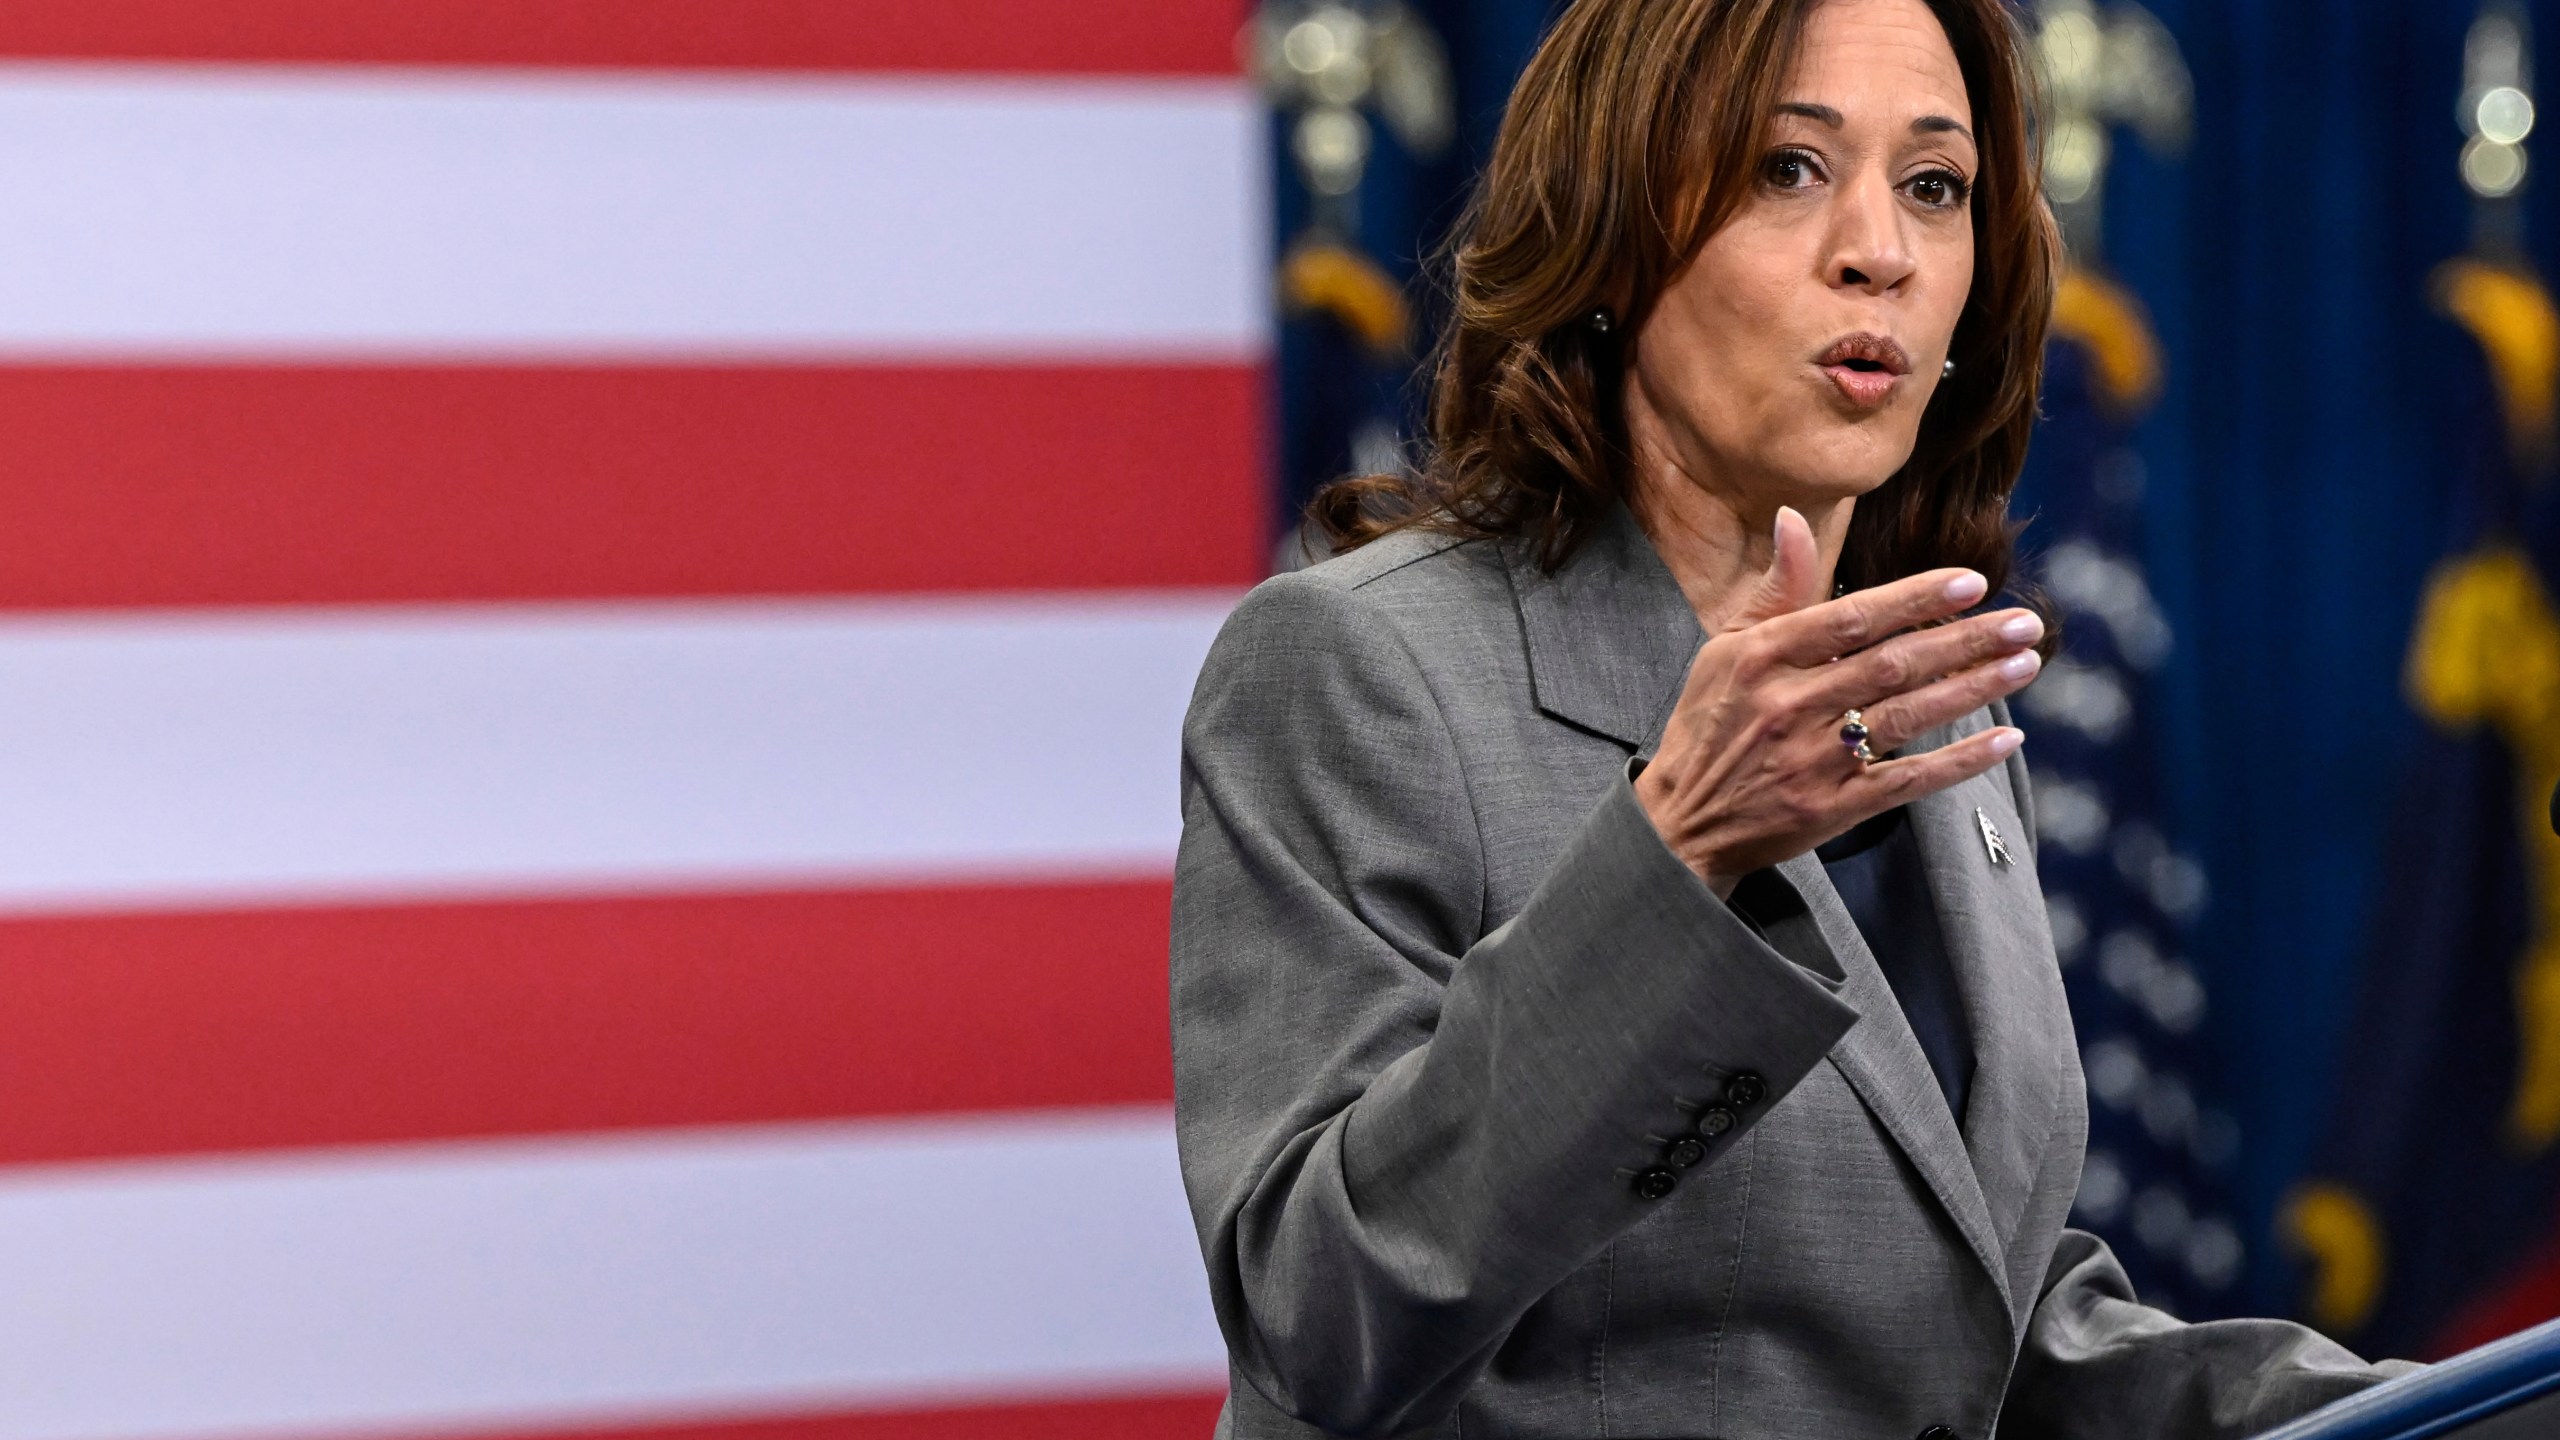 FILE - Vice President Kamala Harris delivers a speech on healthcare at an event in Raleigh, N.C., March 26, 2024. U.S. federal agencies must show their artificial intelligence tools aren’t harming the public, or stop using them, under new rules unveiled by the White House on Thursday. Vice President Kamala Harris said government agencies that use AI tools will be required to verify that those tools do not endanger the rights and safety of the American people. (AP Photo/Matt Kelley, File)